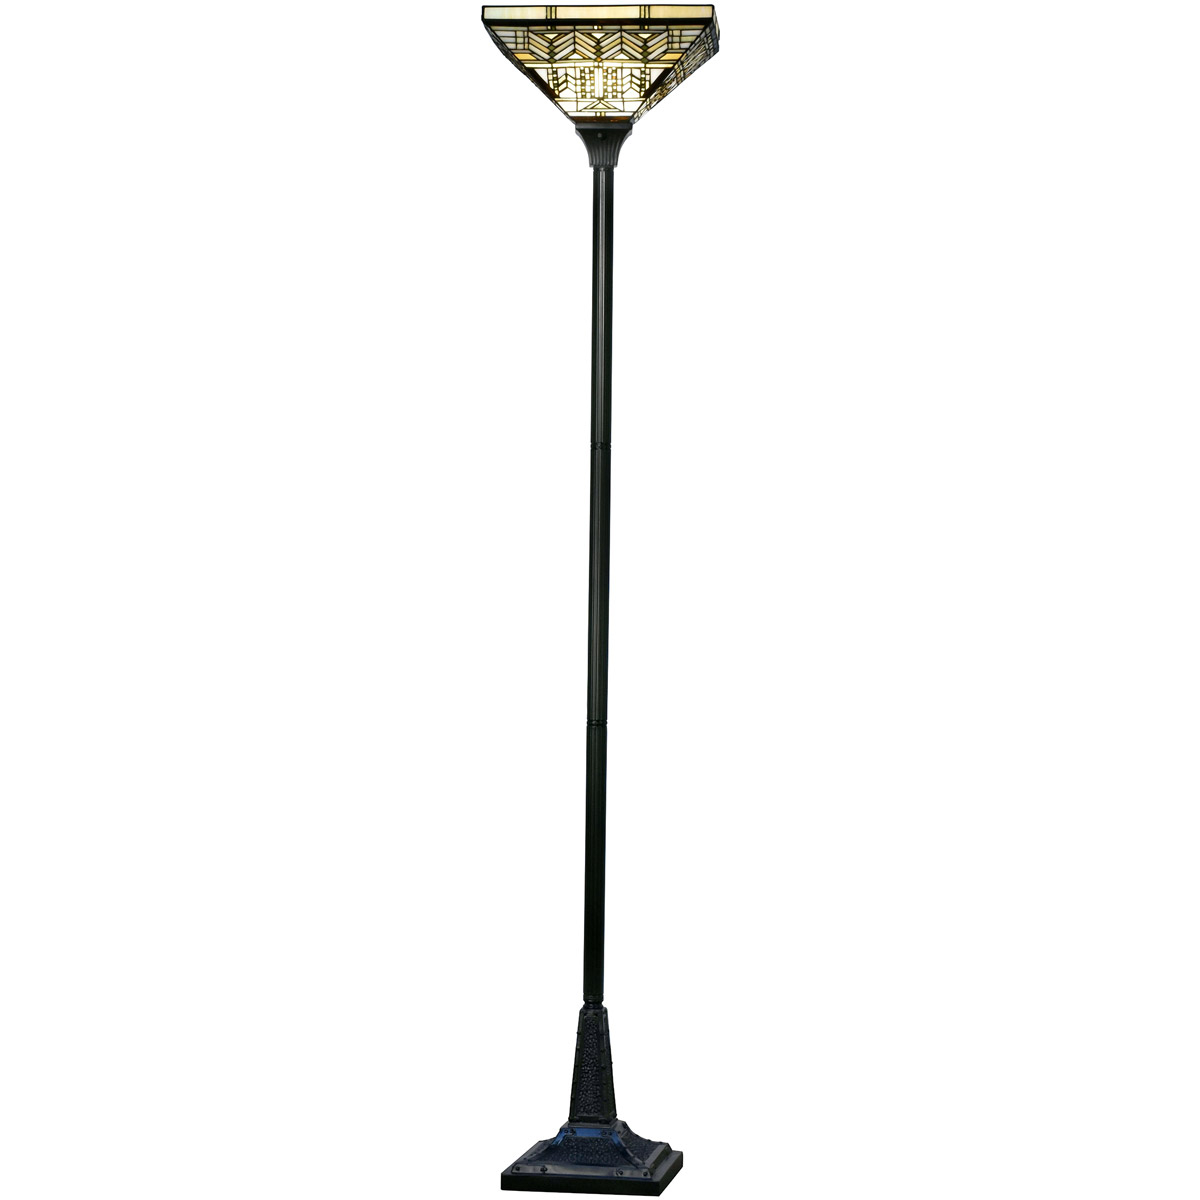 Details About Dale Tiffany Tr17183 Arizona Mission Floor Lamp Mica Bronze with regard to size 1200 X 1200